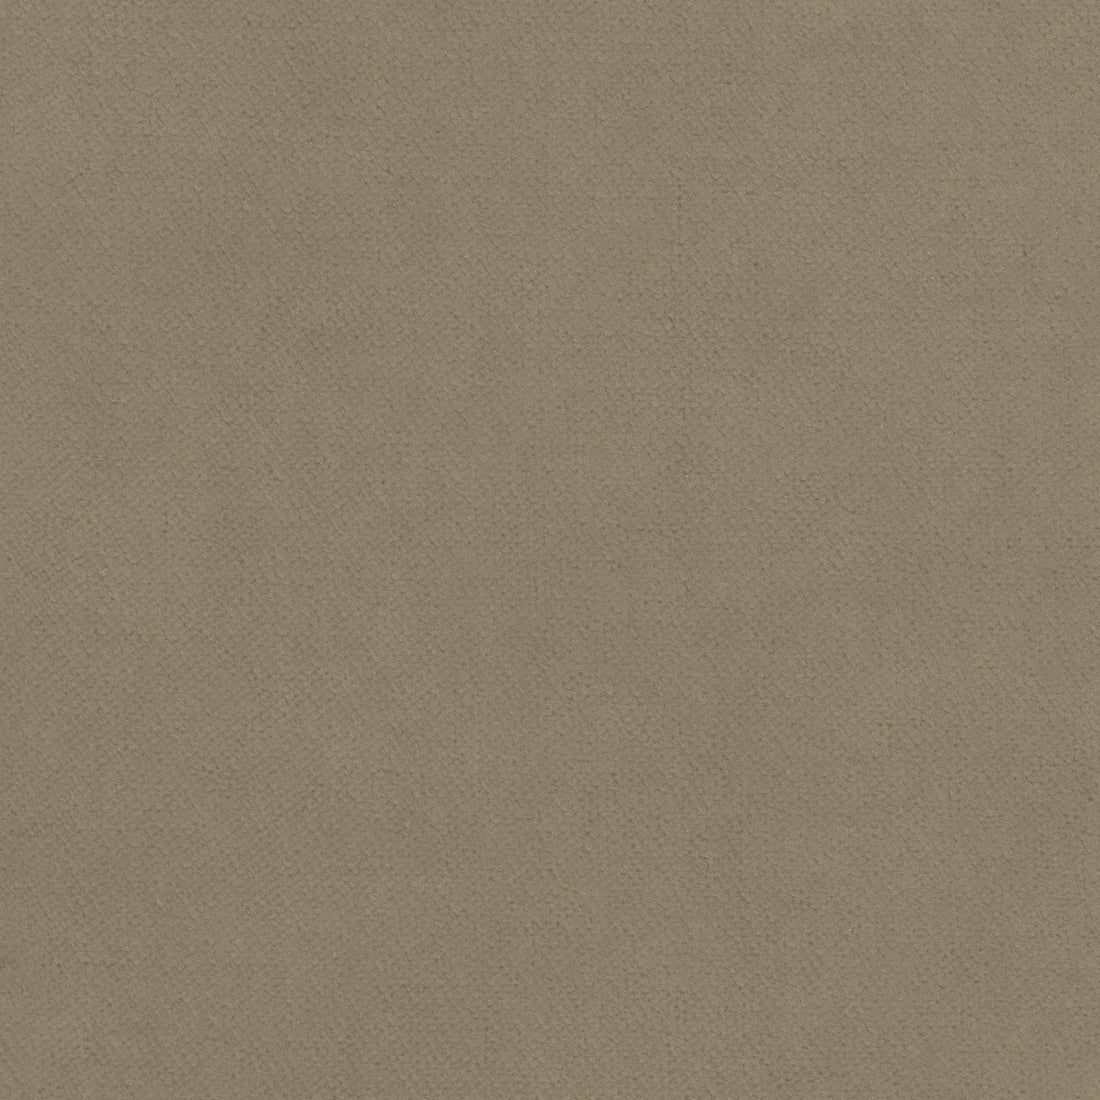 Club Velvet fabric in taupe color - pattern number W7225 - by Thibaut in the Club Velvet collection